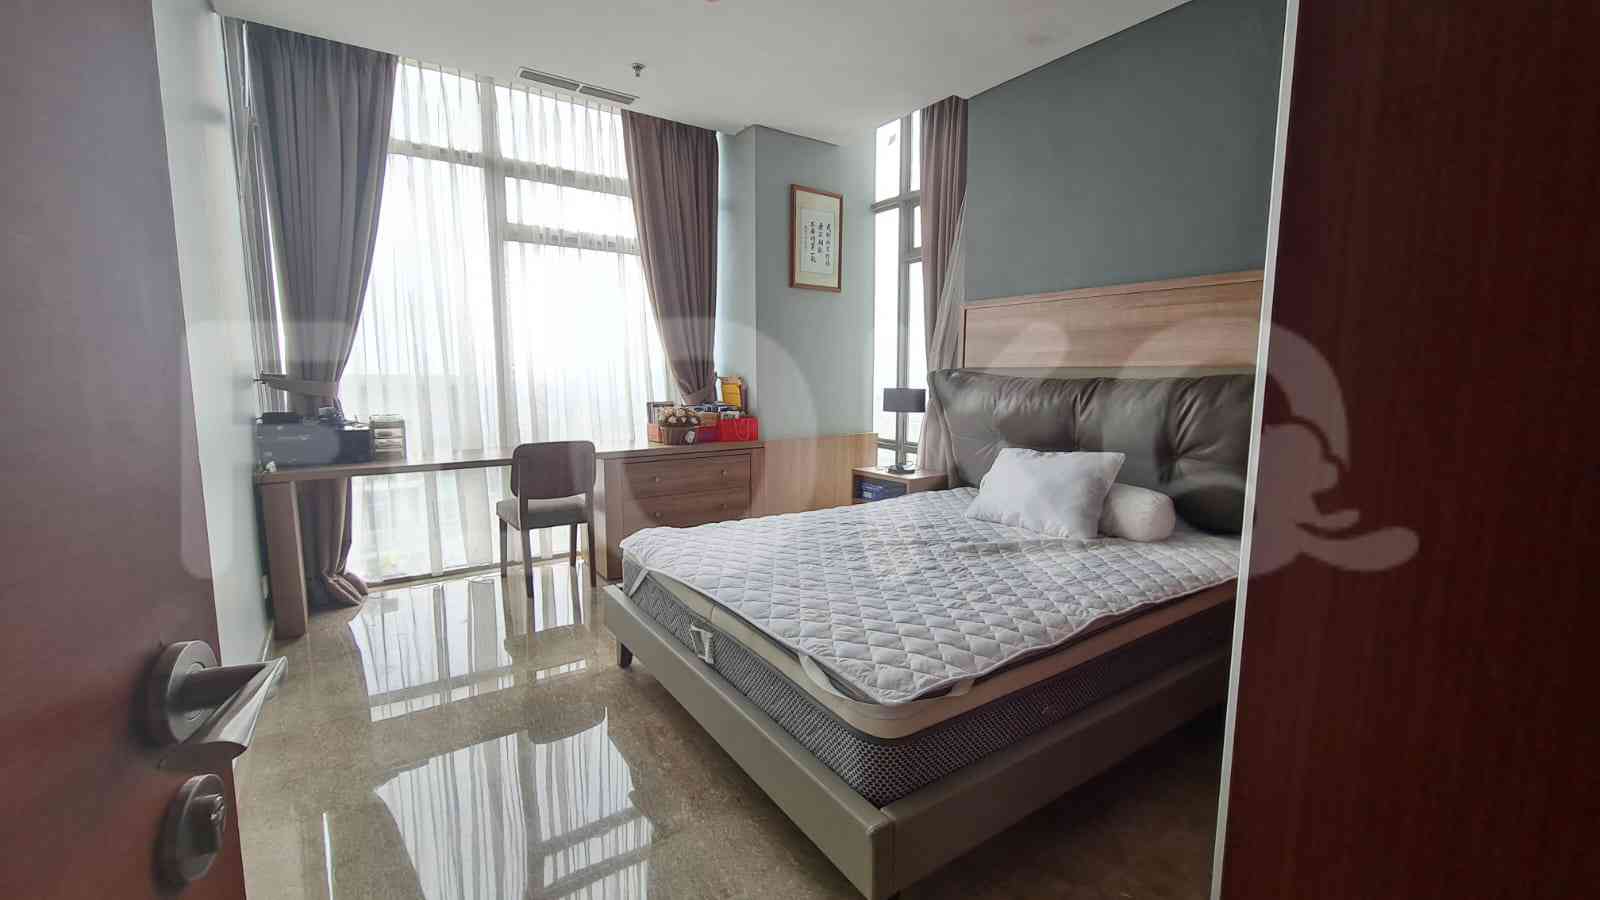 3 Bedroom on 15th Floor for Rent in Essence Darmawangsa Apartment - fcibbd 7